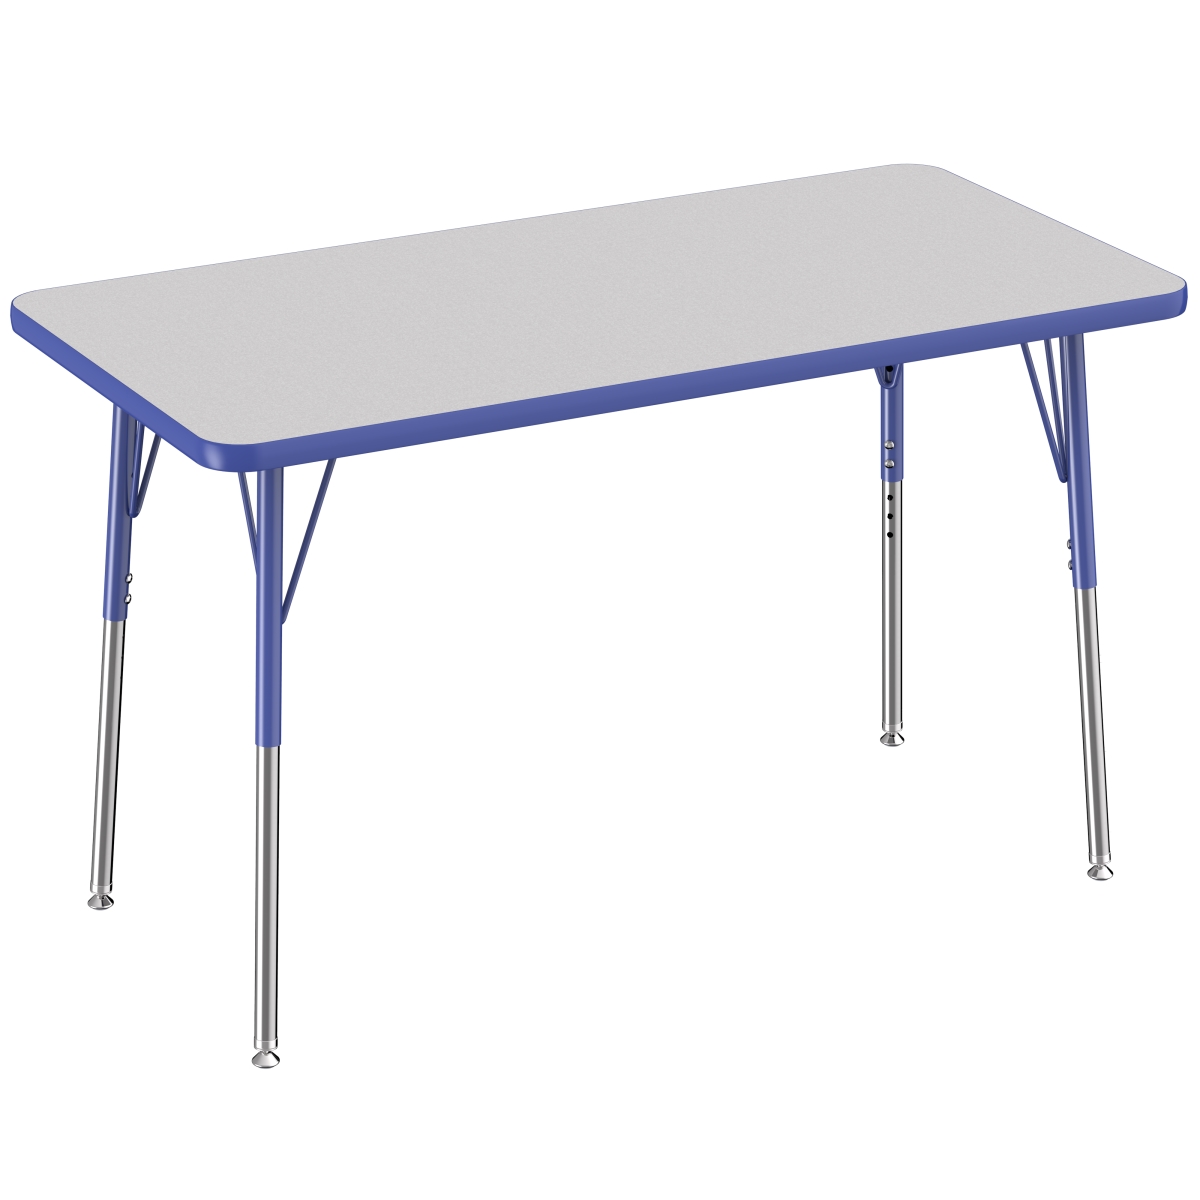 10007-gybl 24 X 48 In. Rectangle T-mold Adjustable Activity Table With Standard Swivel - Grey & Blue